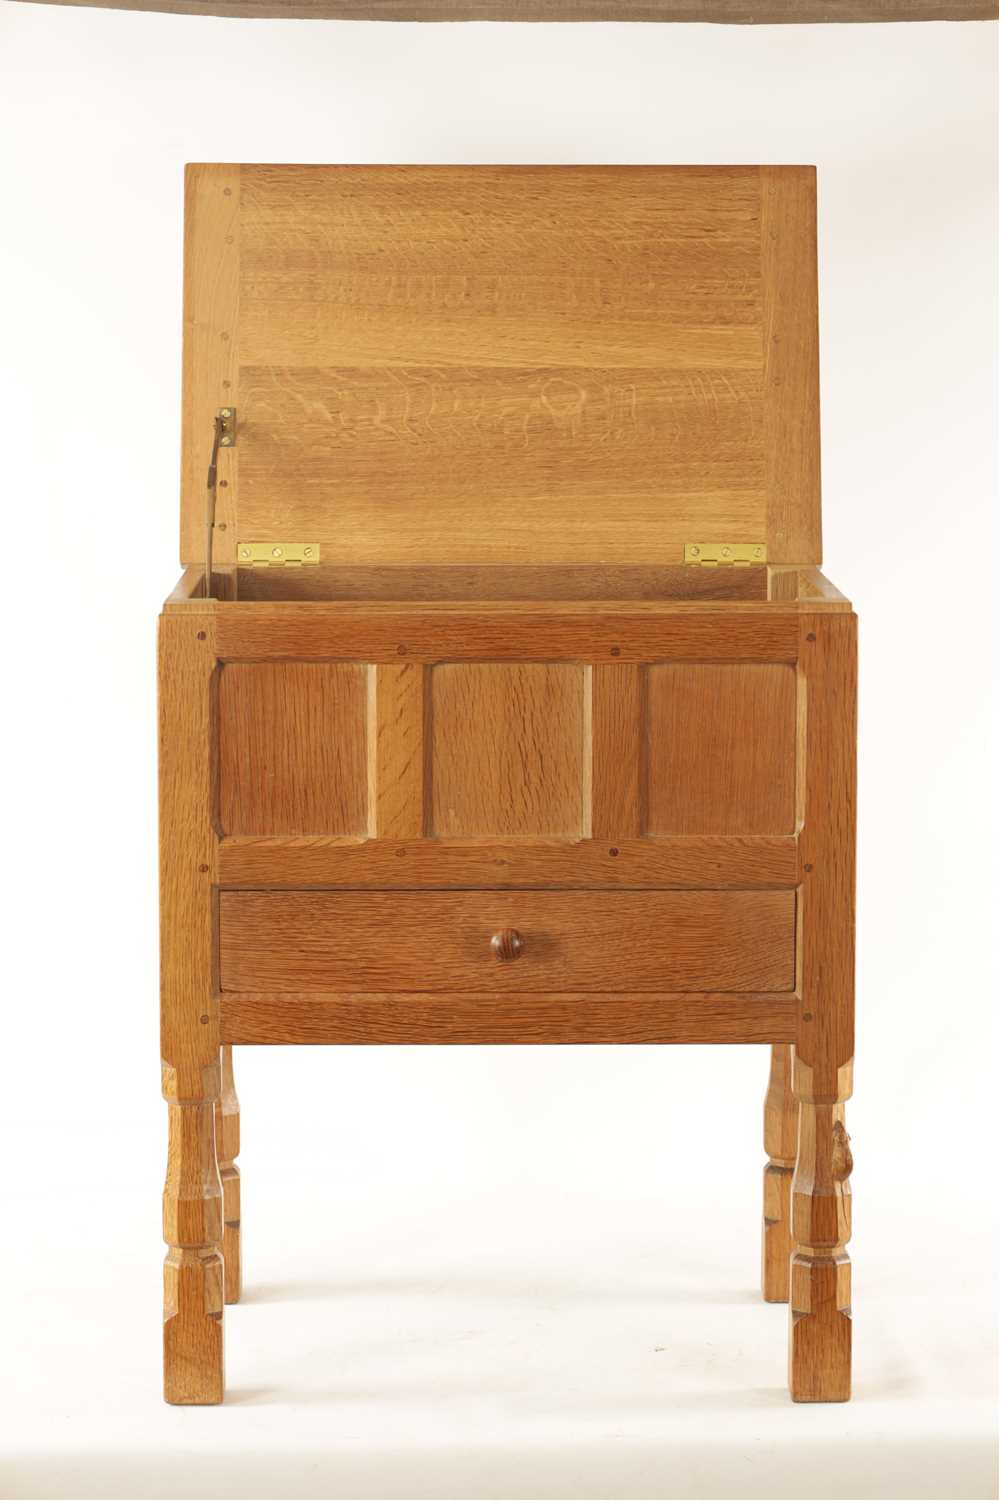 A ROBERT 'MOUSEMAN' THOMPSON JOINED ADZED LIGHT OAK SEWING BOX/SIDE CABINET - Image 10 of 11